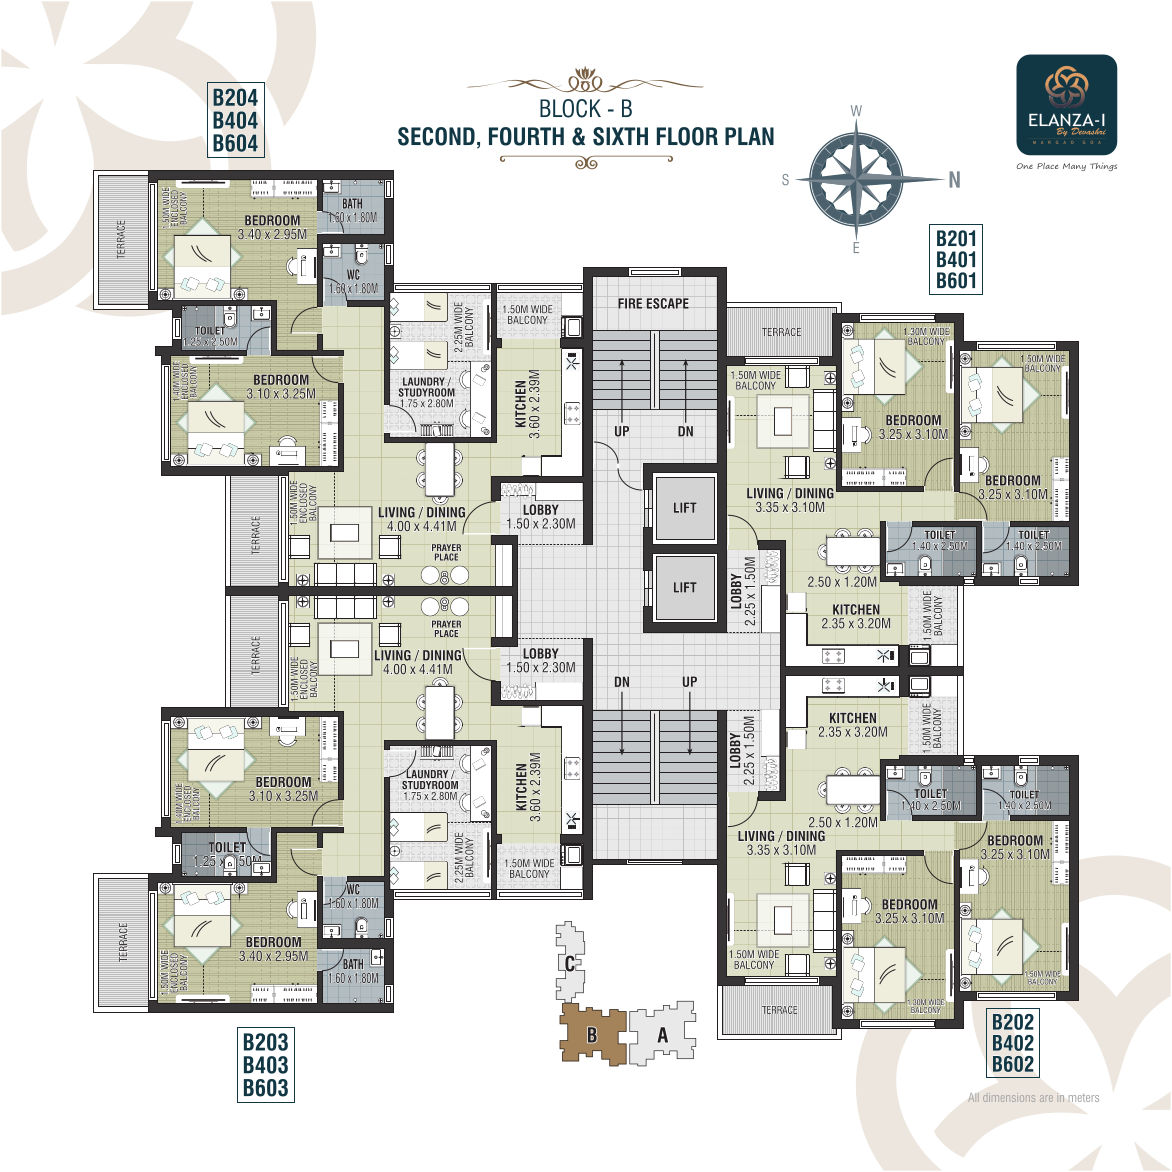 Block B - Second, Fourth and Sixth Floor Plan